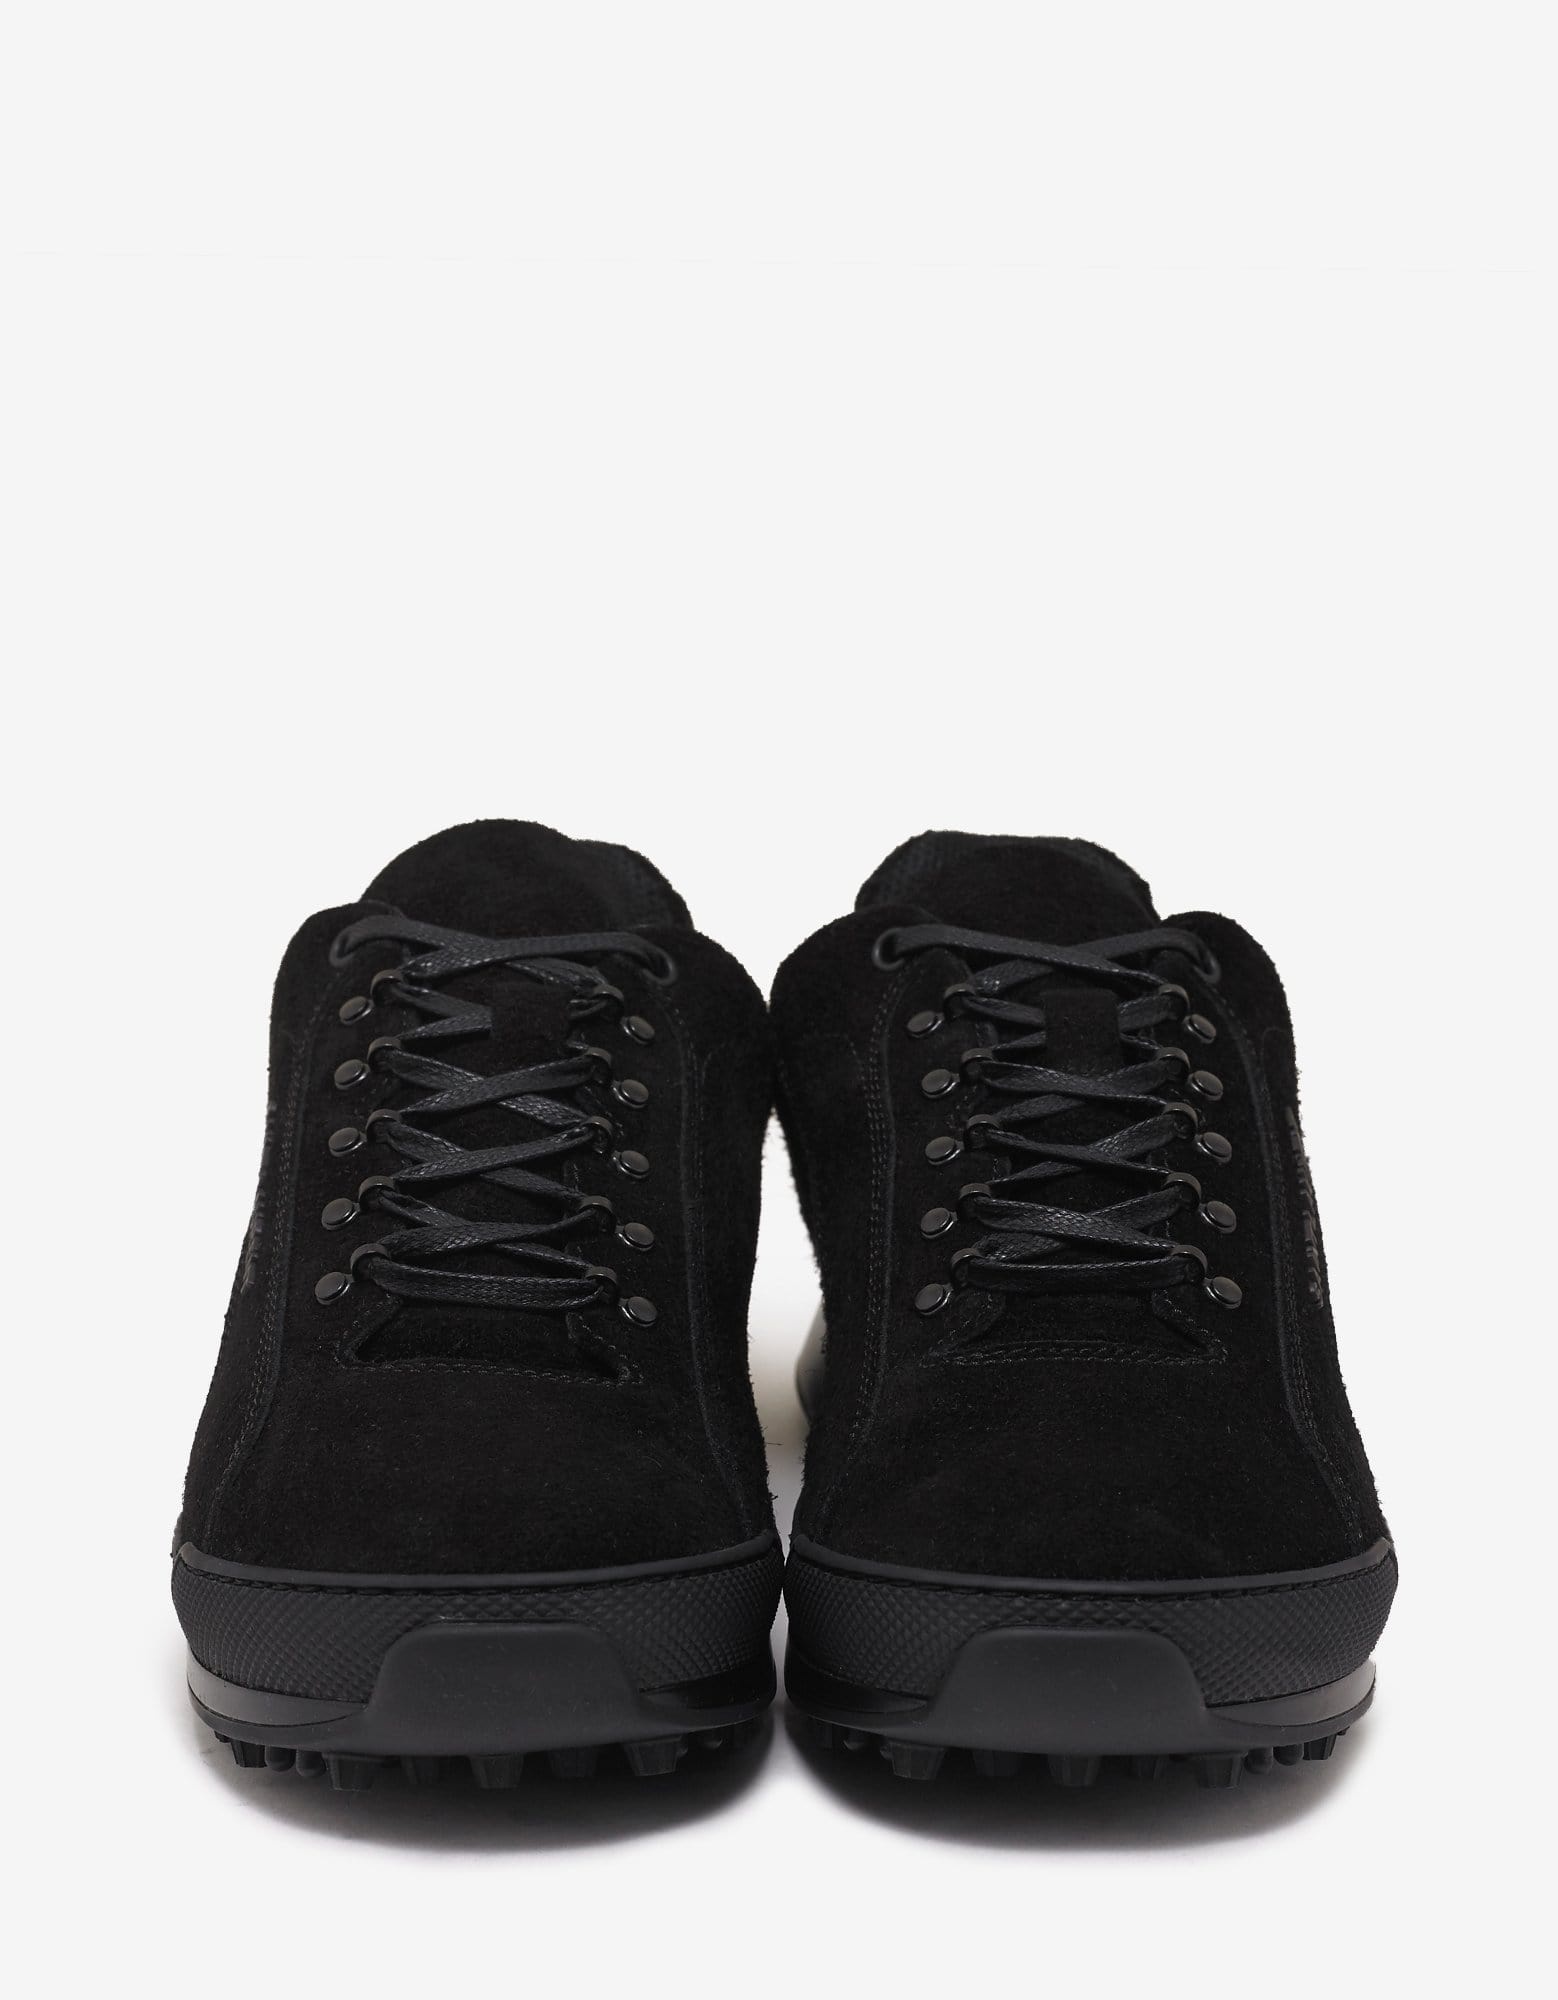 Black Suede Leather Jump Trainers - 4